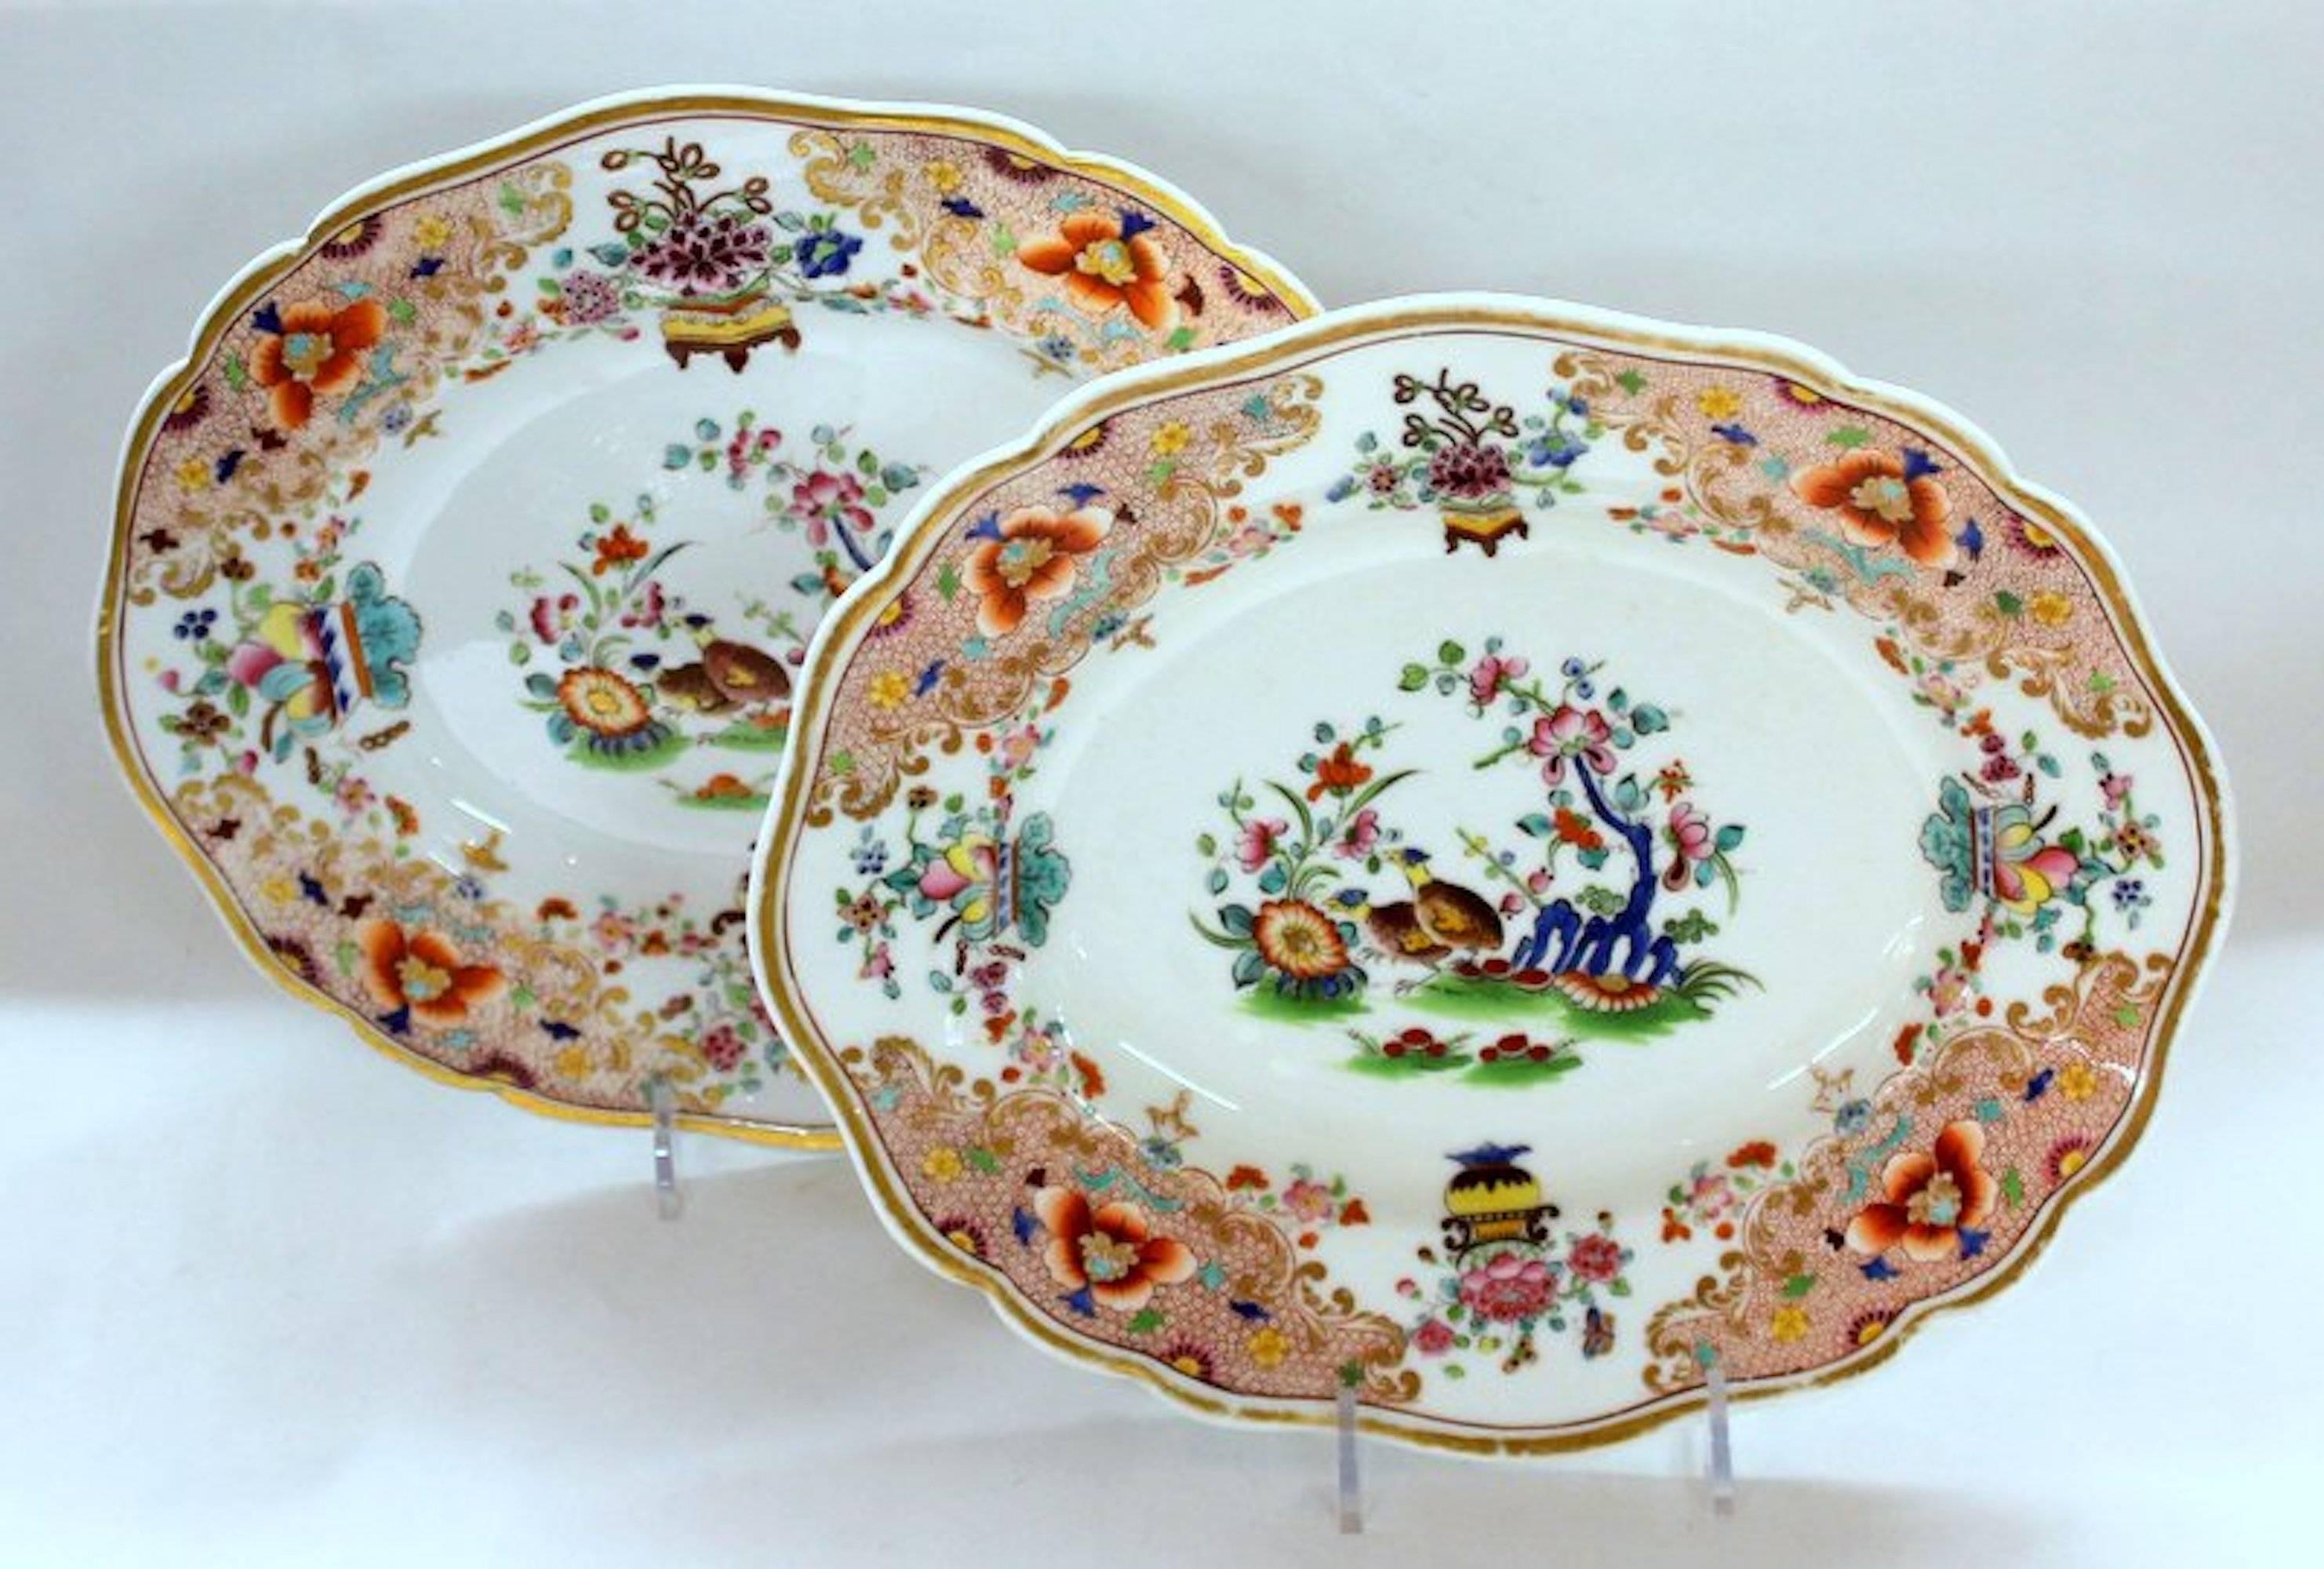 Pair of fabulous quality antique English Chamberlains and Co. (Worcester) hand-painted porcelain "Kakiemon" decor small platters with rare impressed "Chamberlains" mark on lower rare of one of the pair of platters.